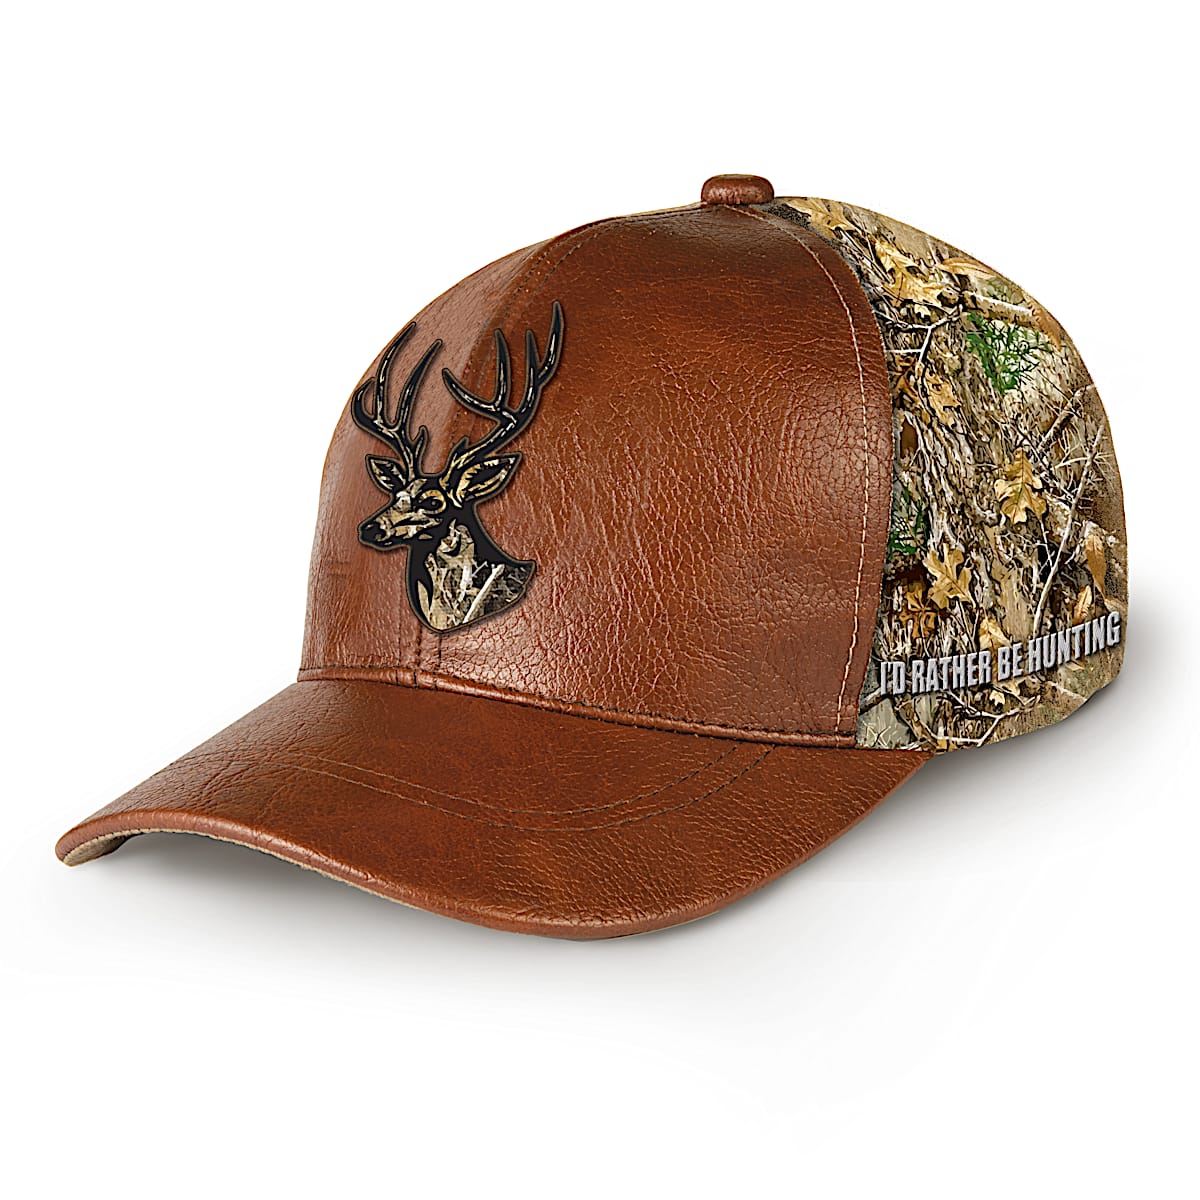 Brown Faux Leather Hat Featuring A Camouflage Buck Patch And The Phrase I'D  RATHER BE HUNTING